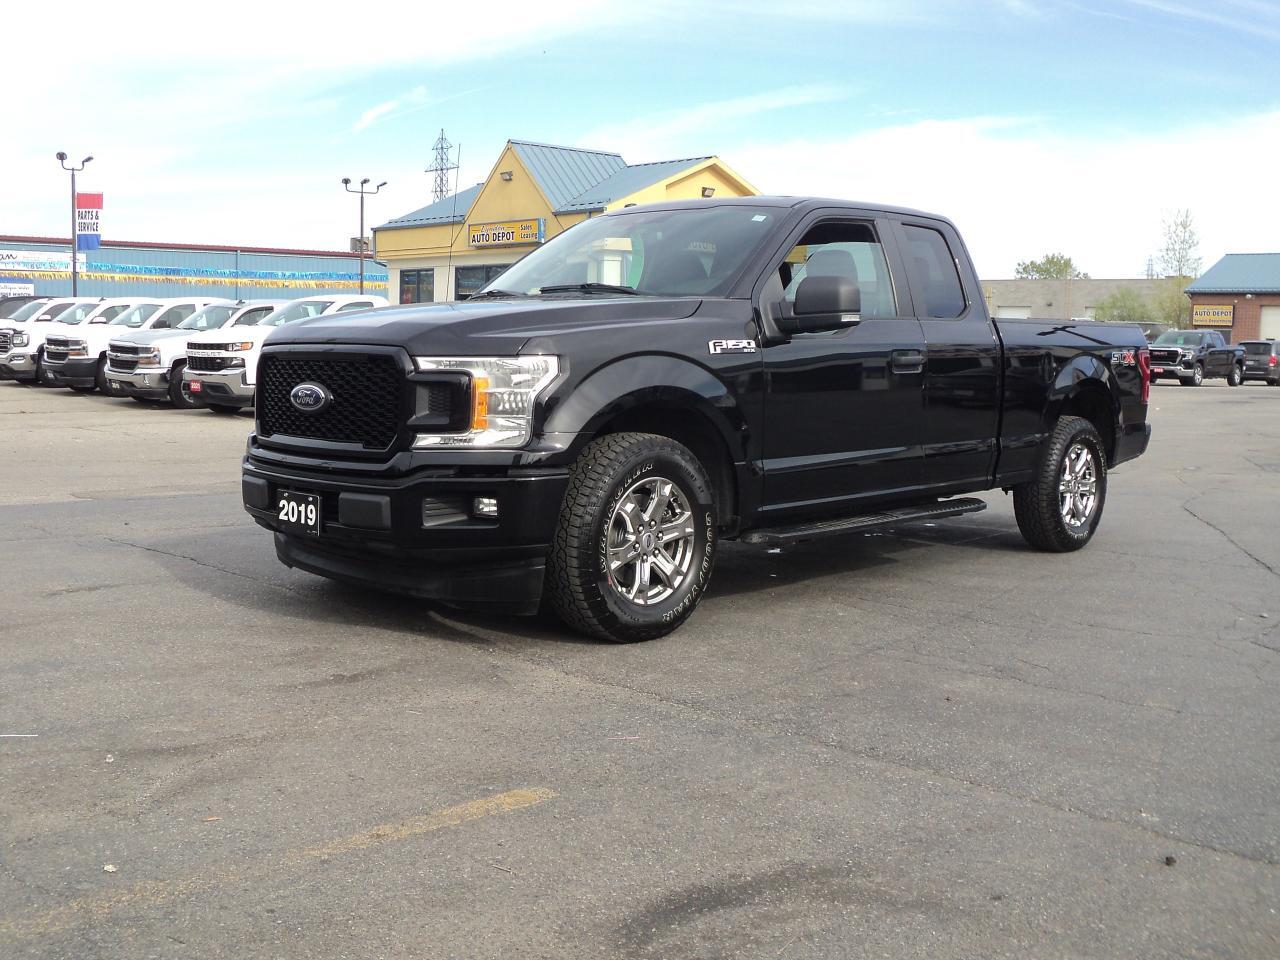 2019 Ford F-150 STX SuperCab2WD2.7L6cyl EcoBoost6'5Box BackUpCam